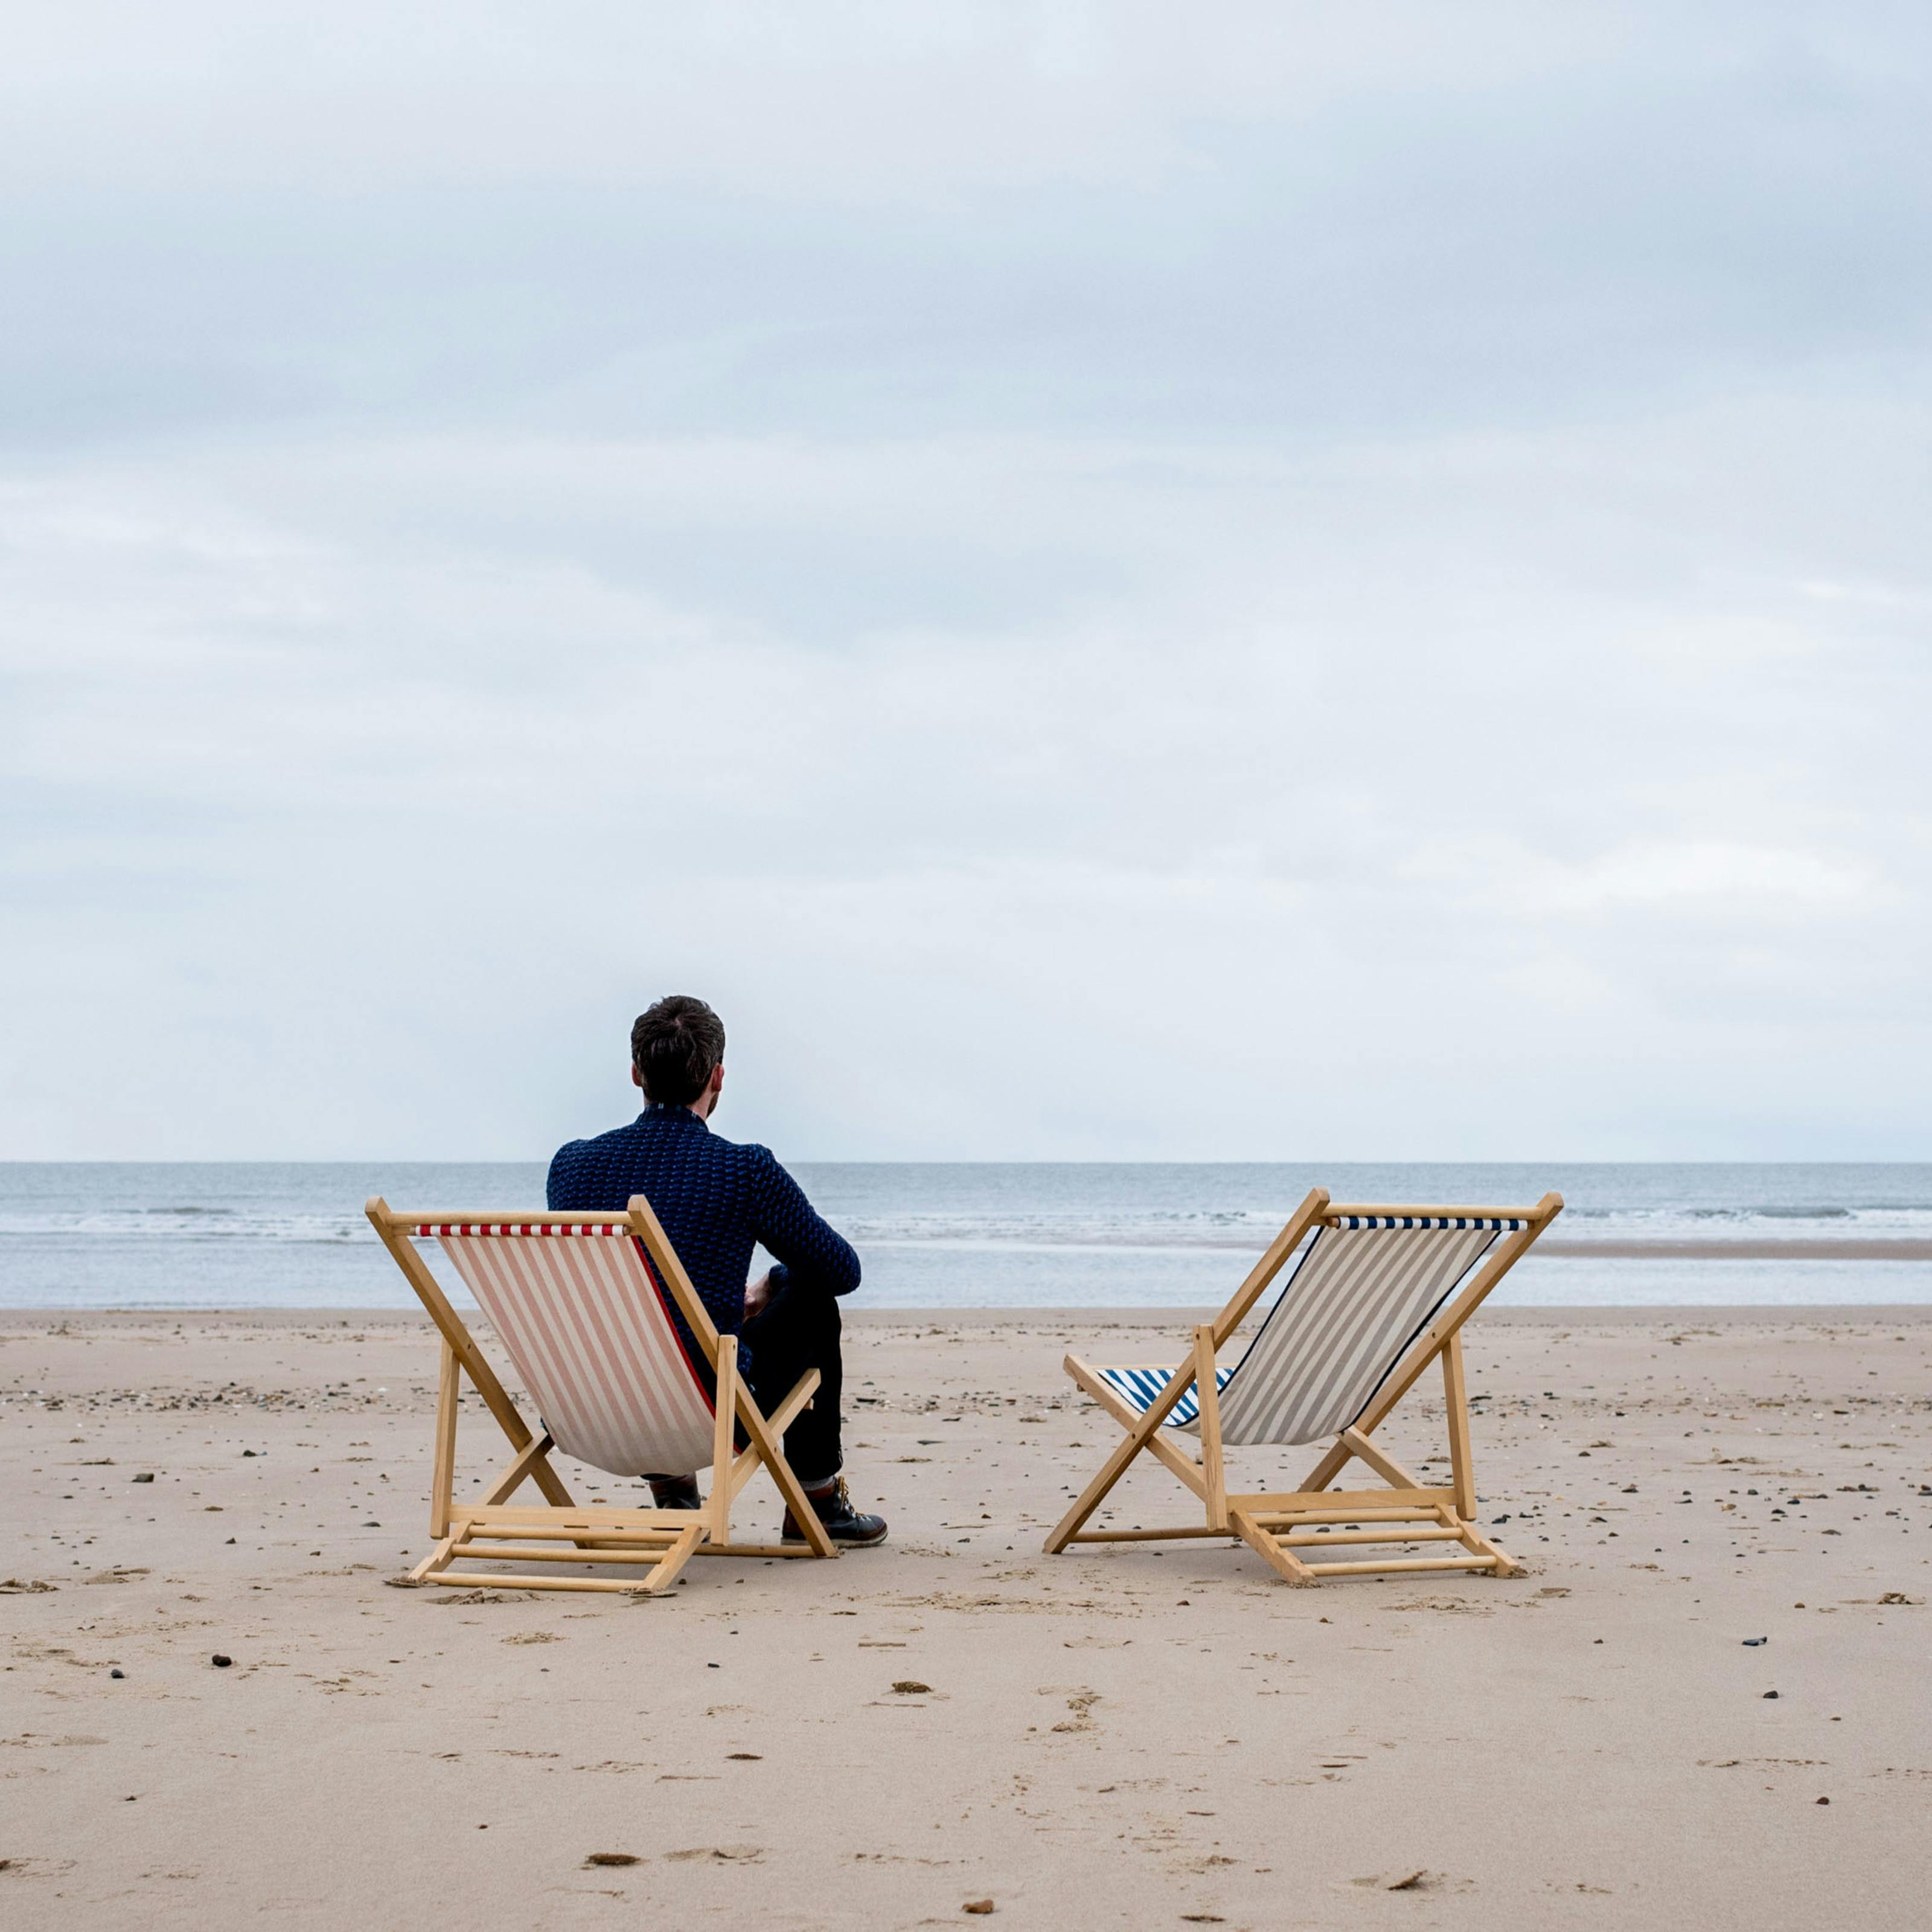 Photograph of a young man sat in a deck chair on a sandy beach, looking out to sea. To his right is an empty deck chair.